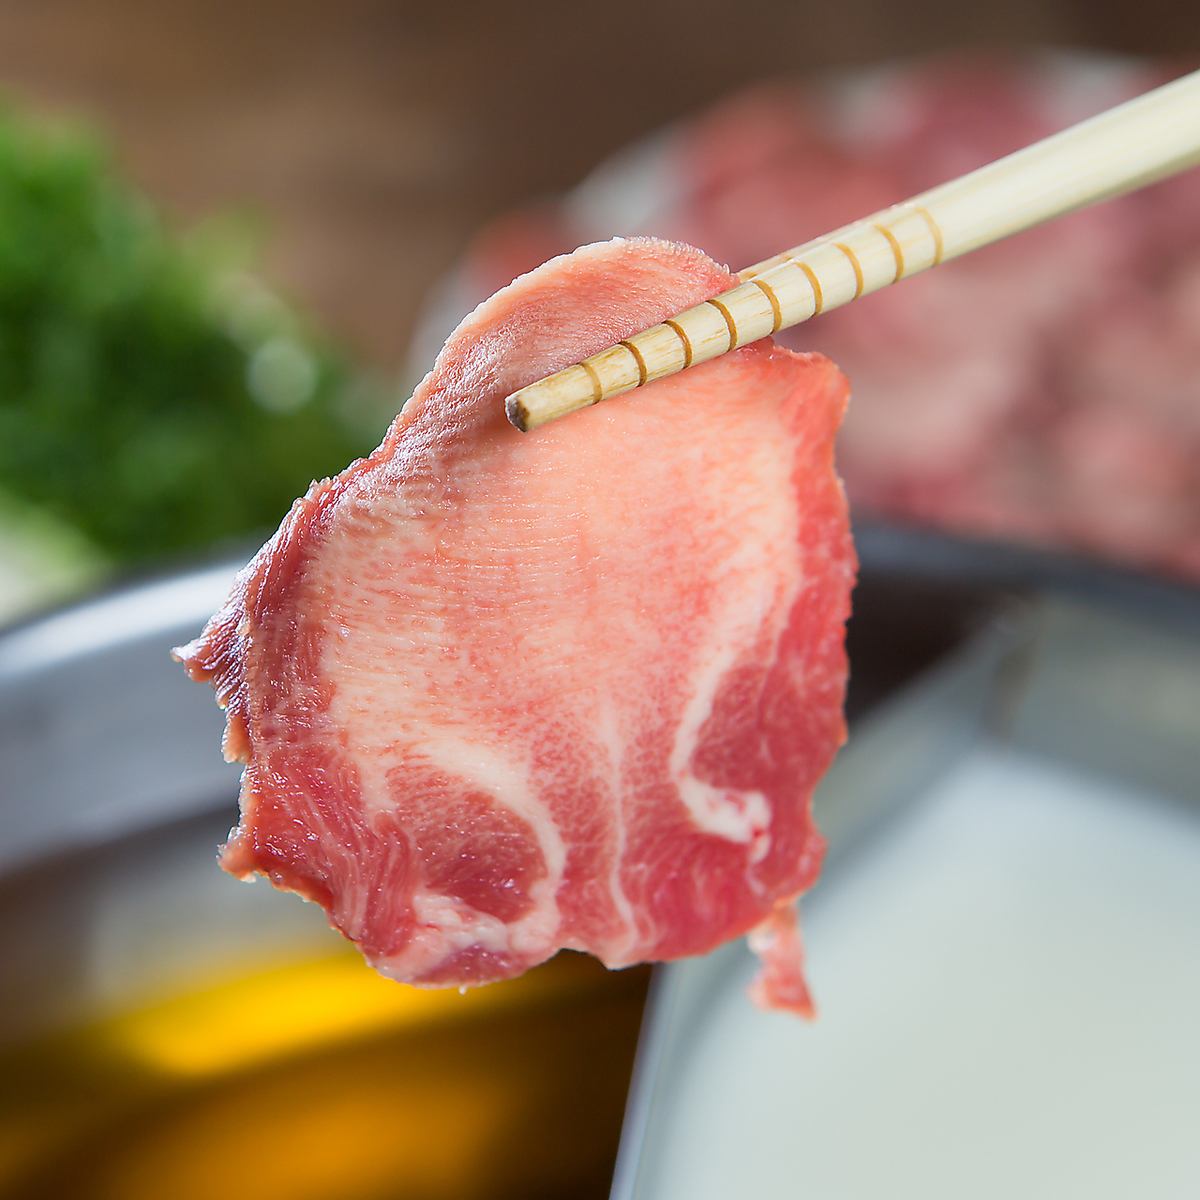 Our restaurant uses domestically produced beef tongue! Enjoy the soft and delicious tongue.